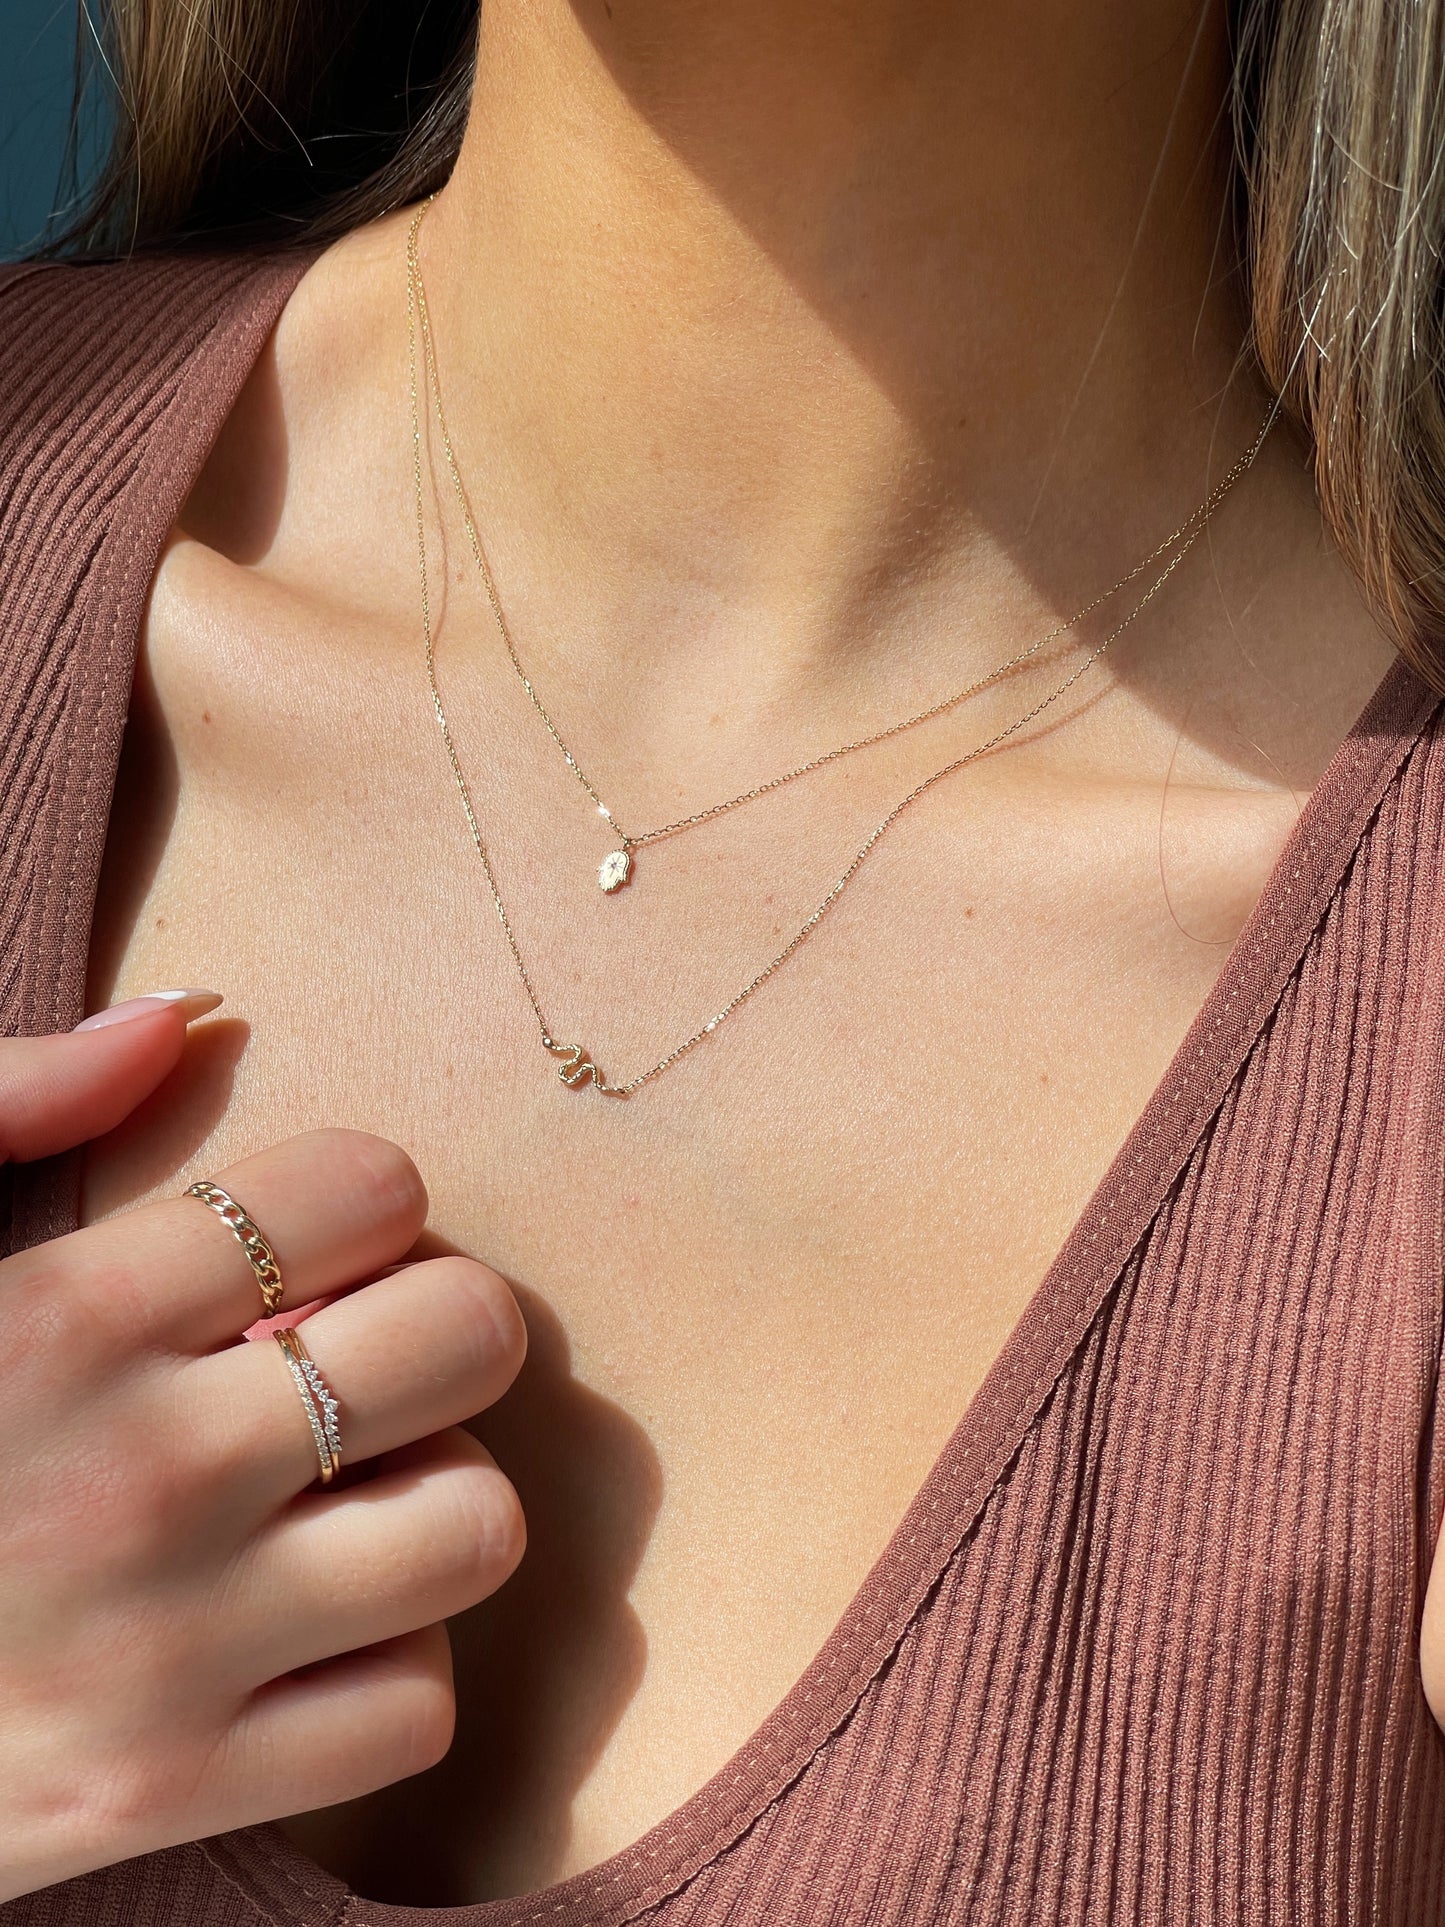 snake necklace, hand necklace, fatima hand necklace, 14k hand necklace, 14k fatima luck necklace